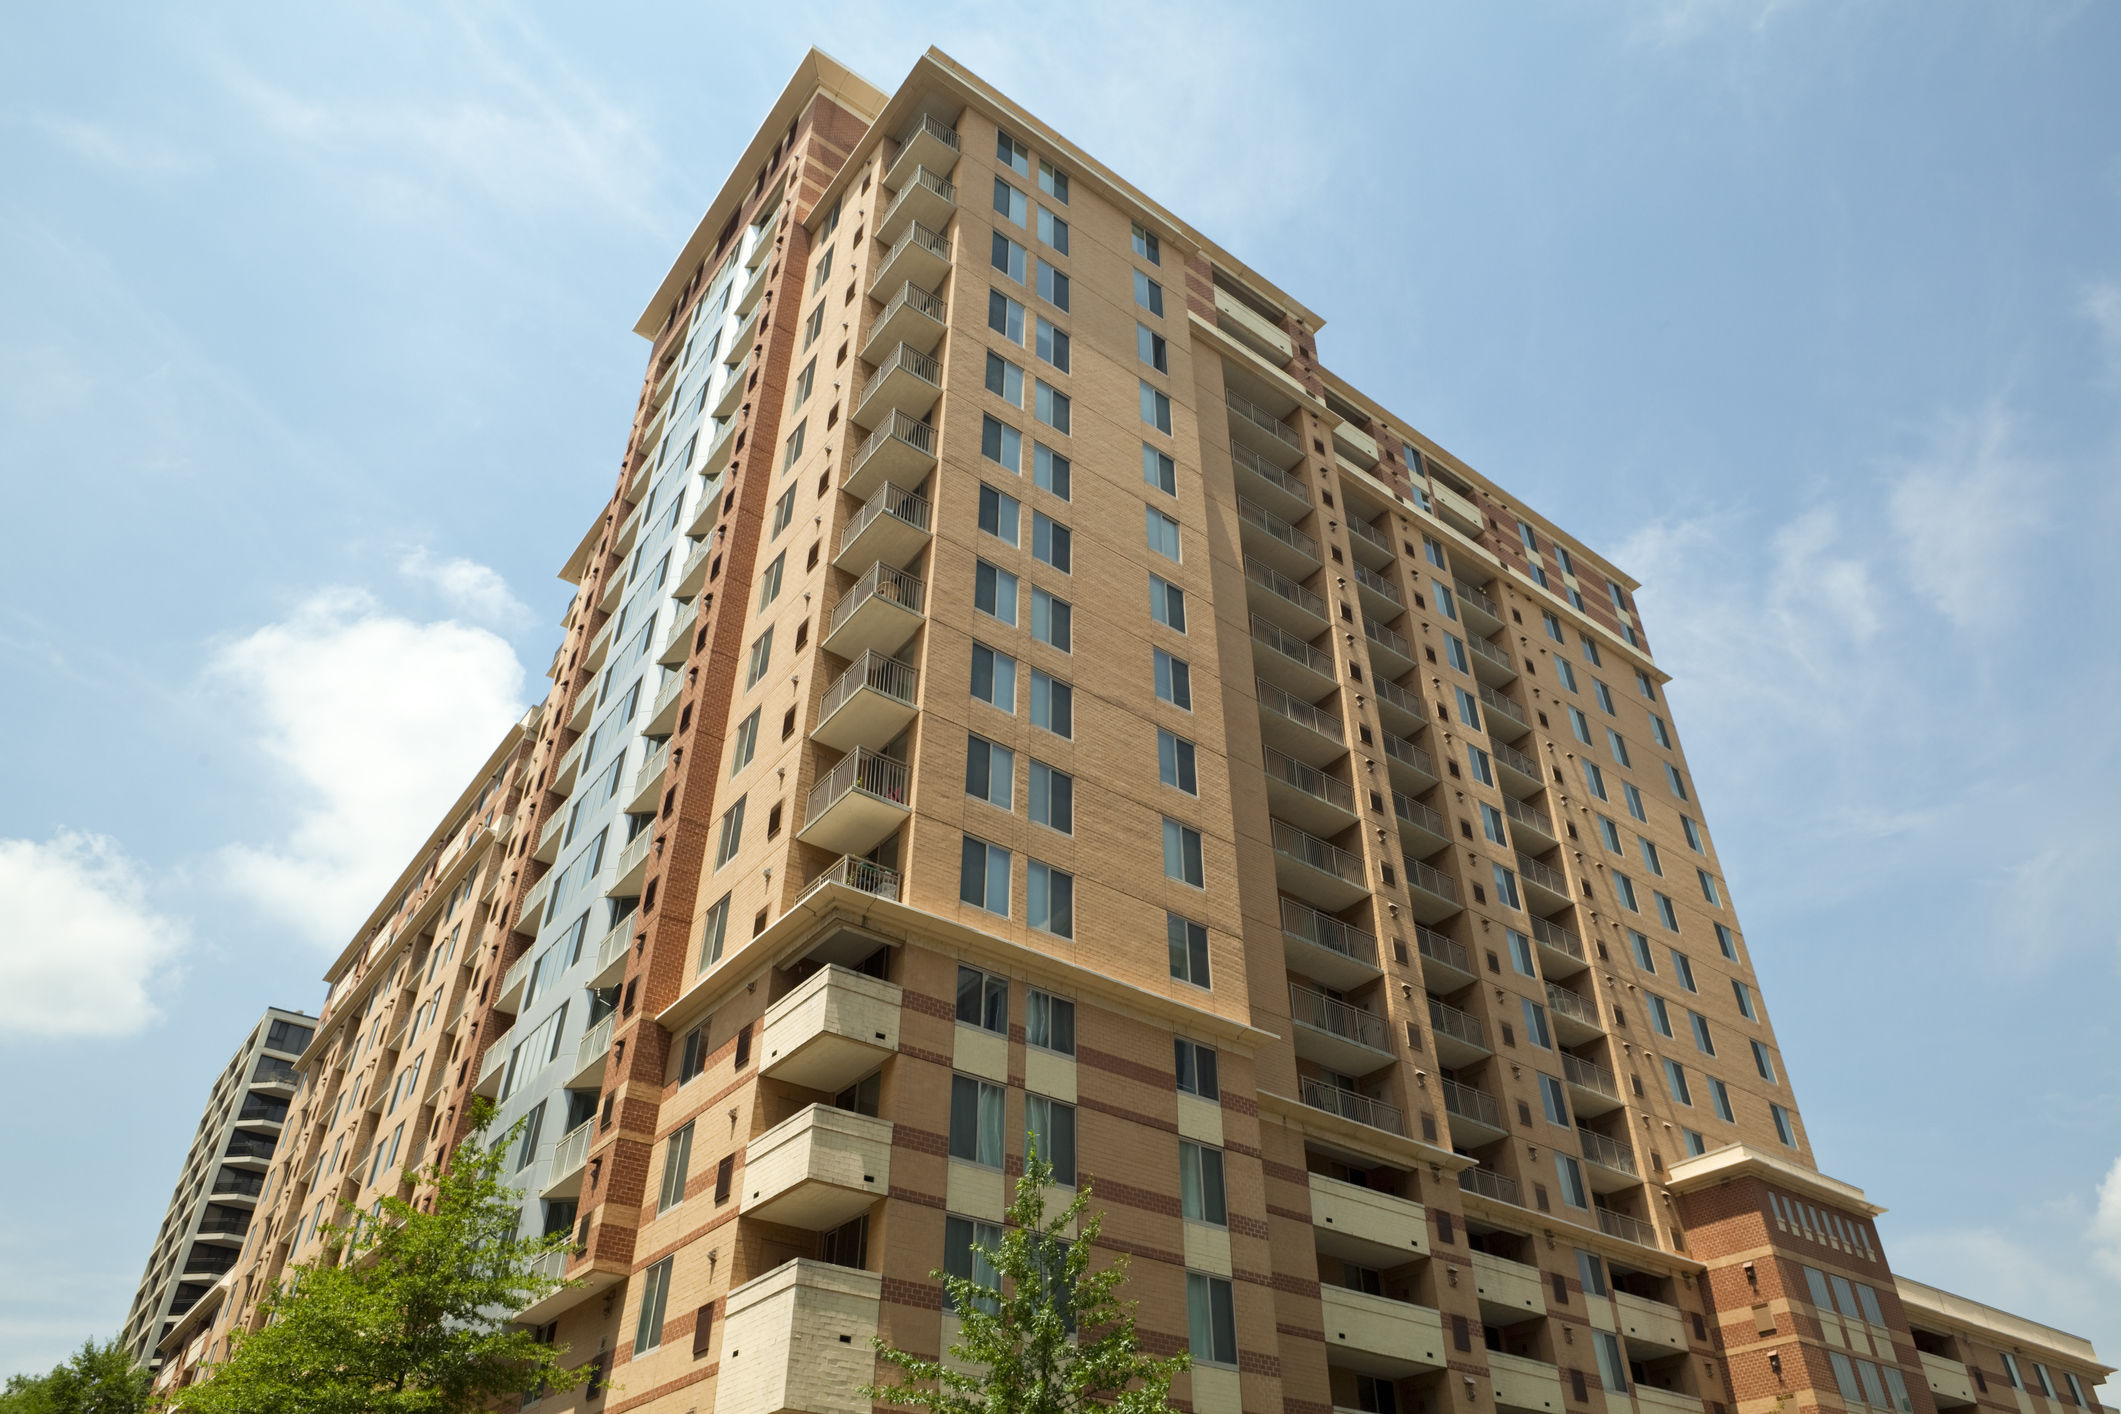 Rosslyn apartment complex